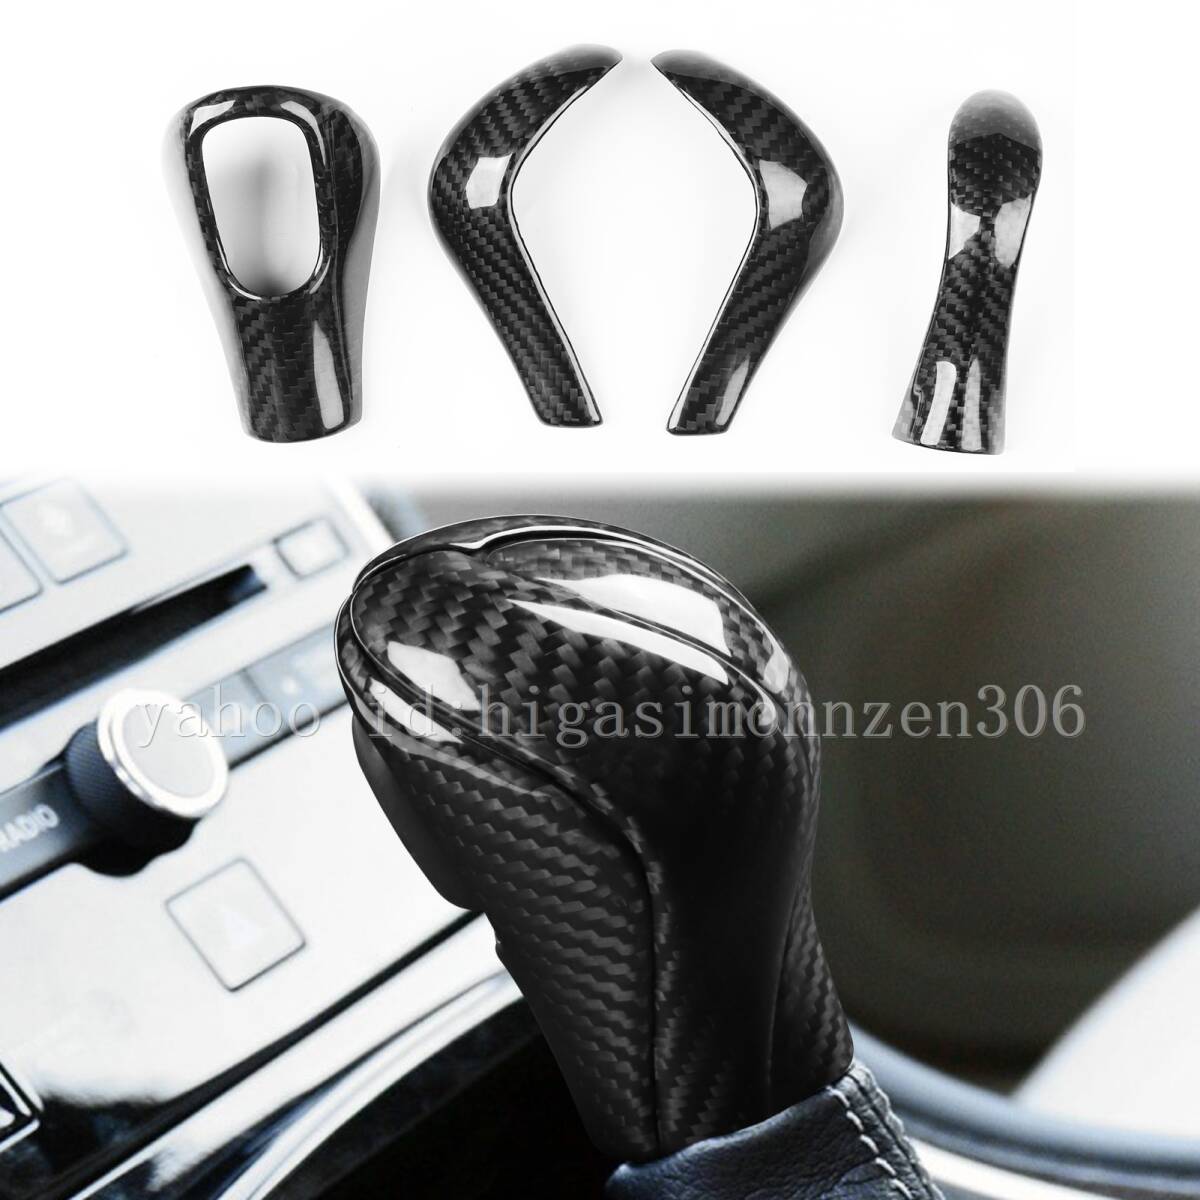  free shipping Infinity Skyline V37 Q50 dry carbon made shift knob cover 4 pieces set sticking type 